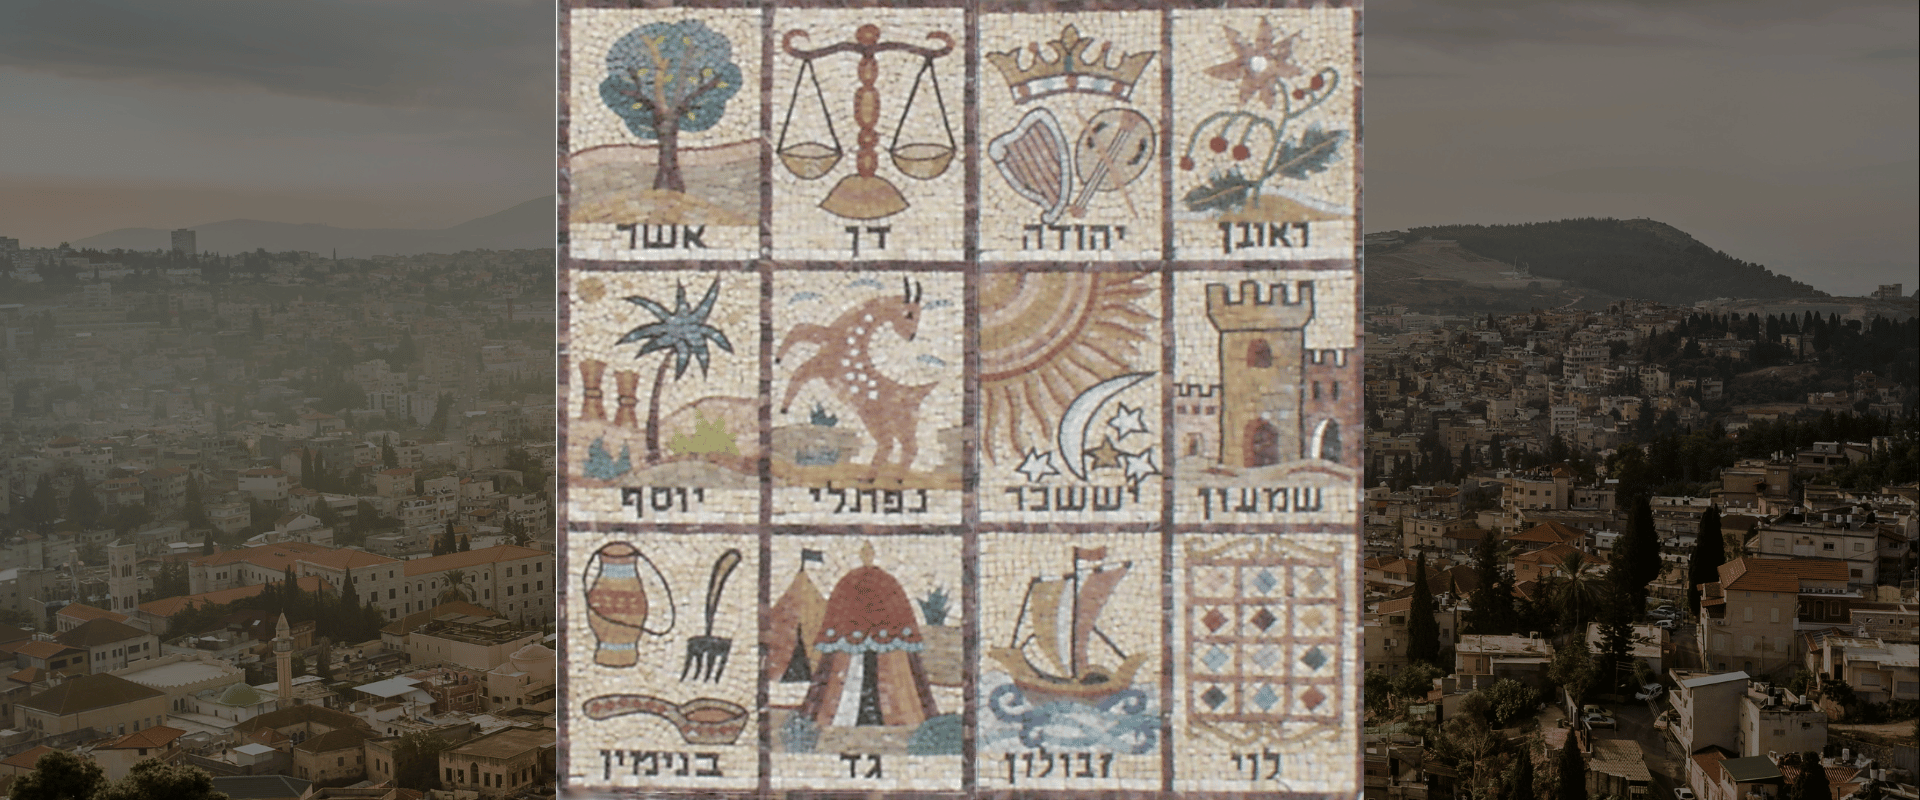 who are the descendants of the 12 tribes of Israel today